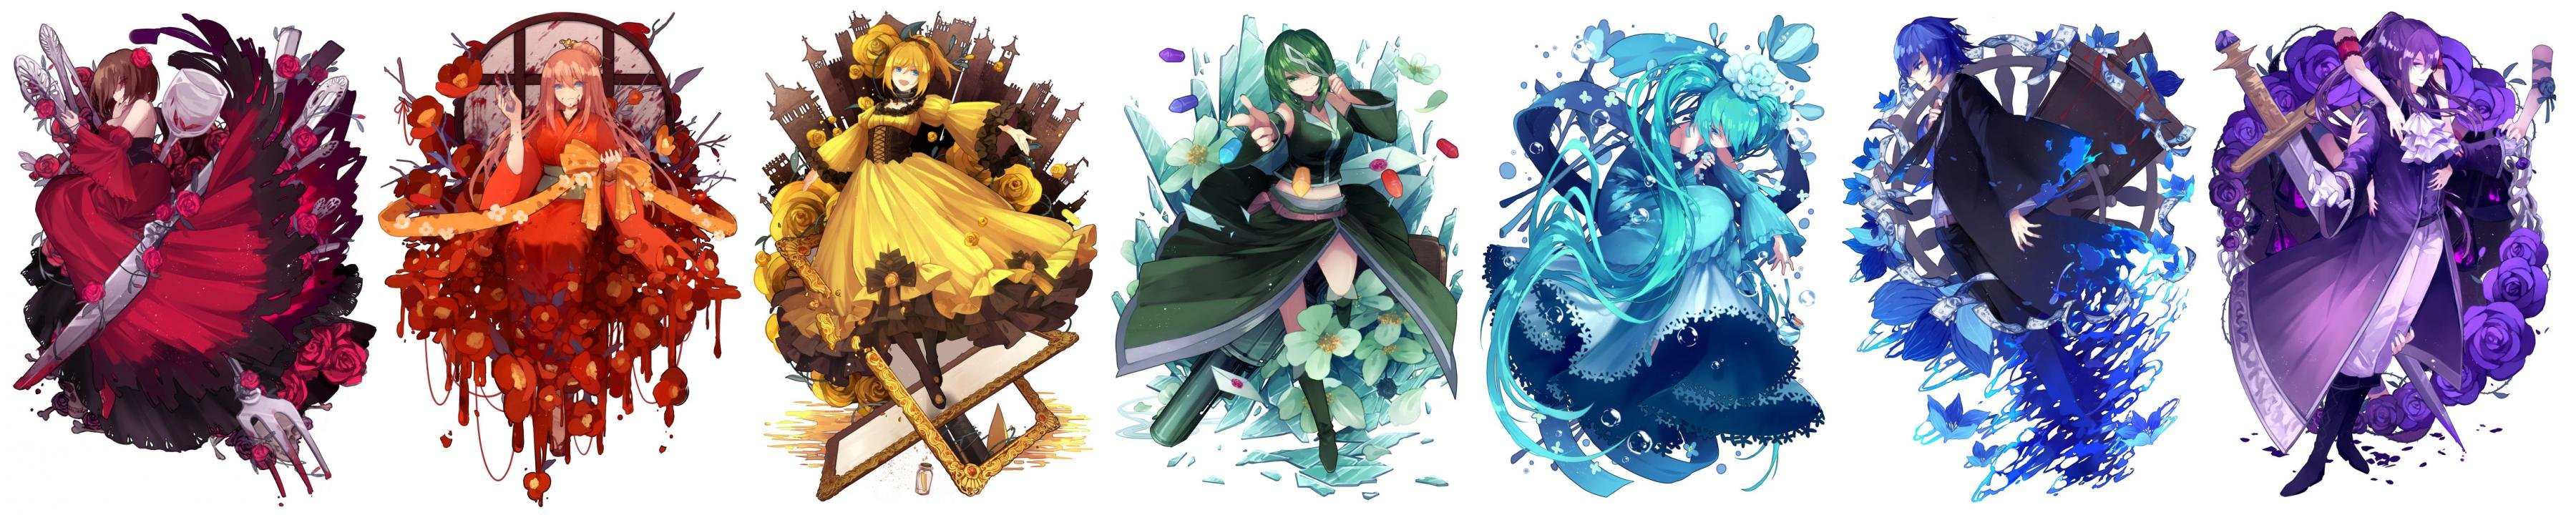 Download triple monitor 3600x720 Vocaloid desktop wallpaper ID:5563 for free